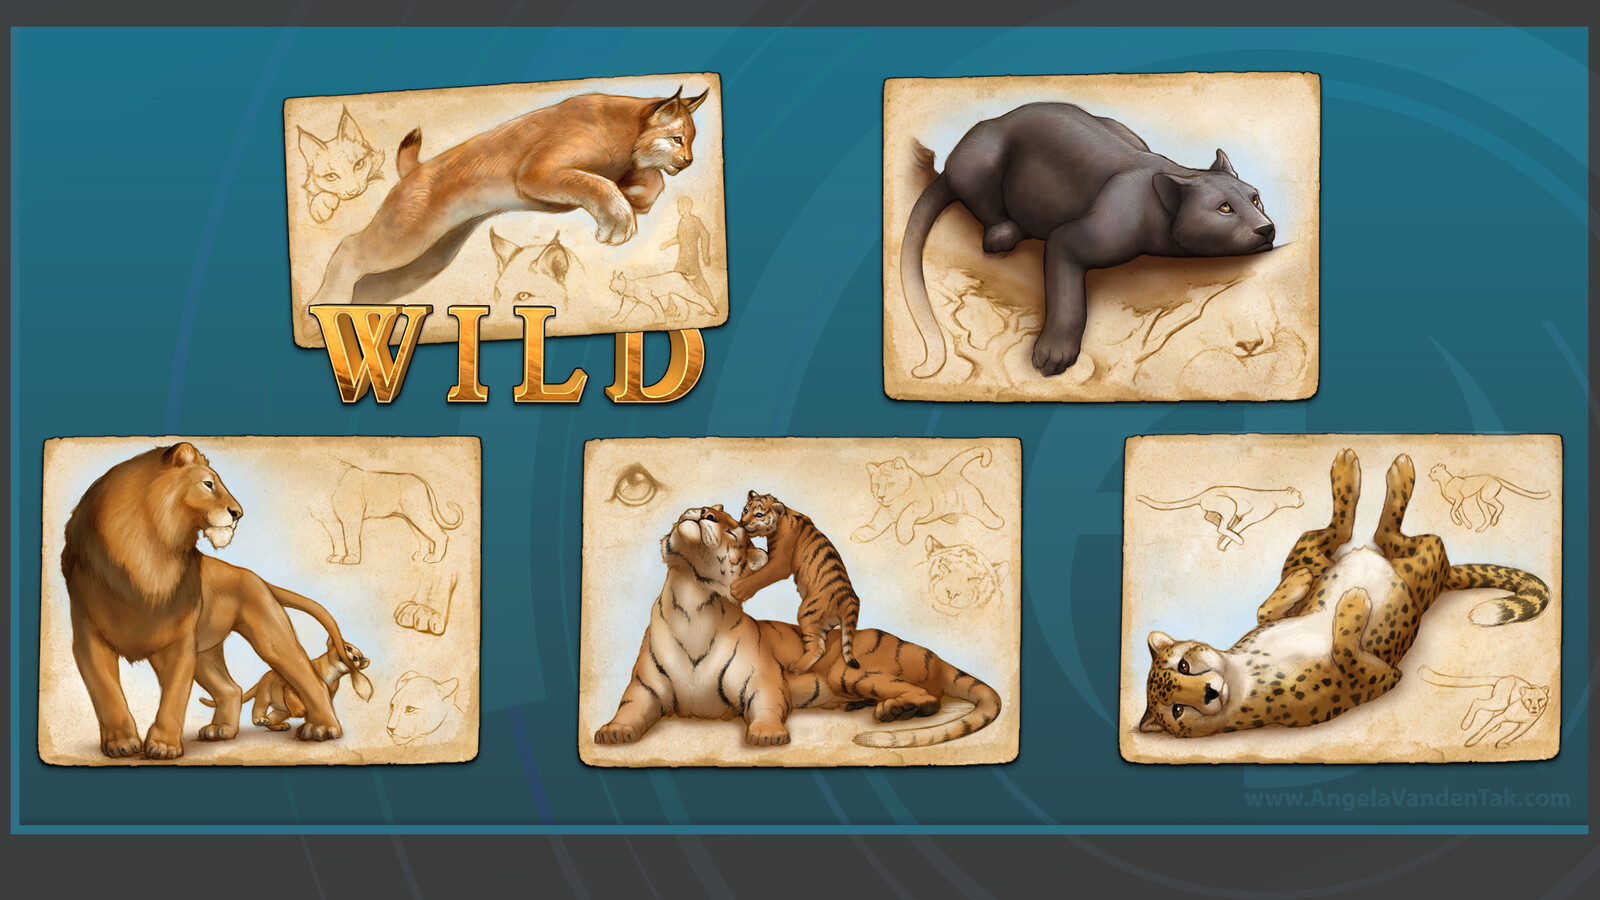 SUPER FREE GAMES - WILDCATS OF THE WORLD